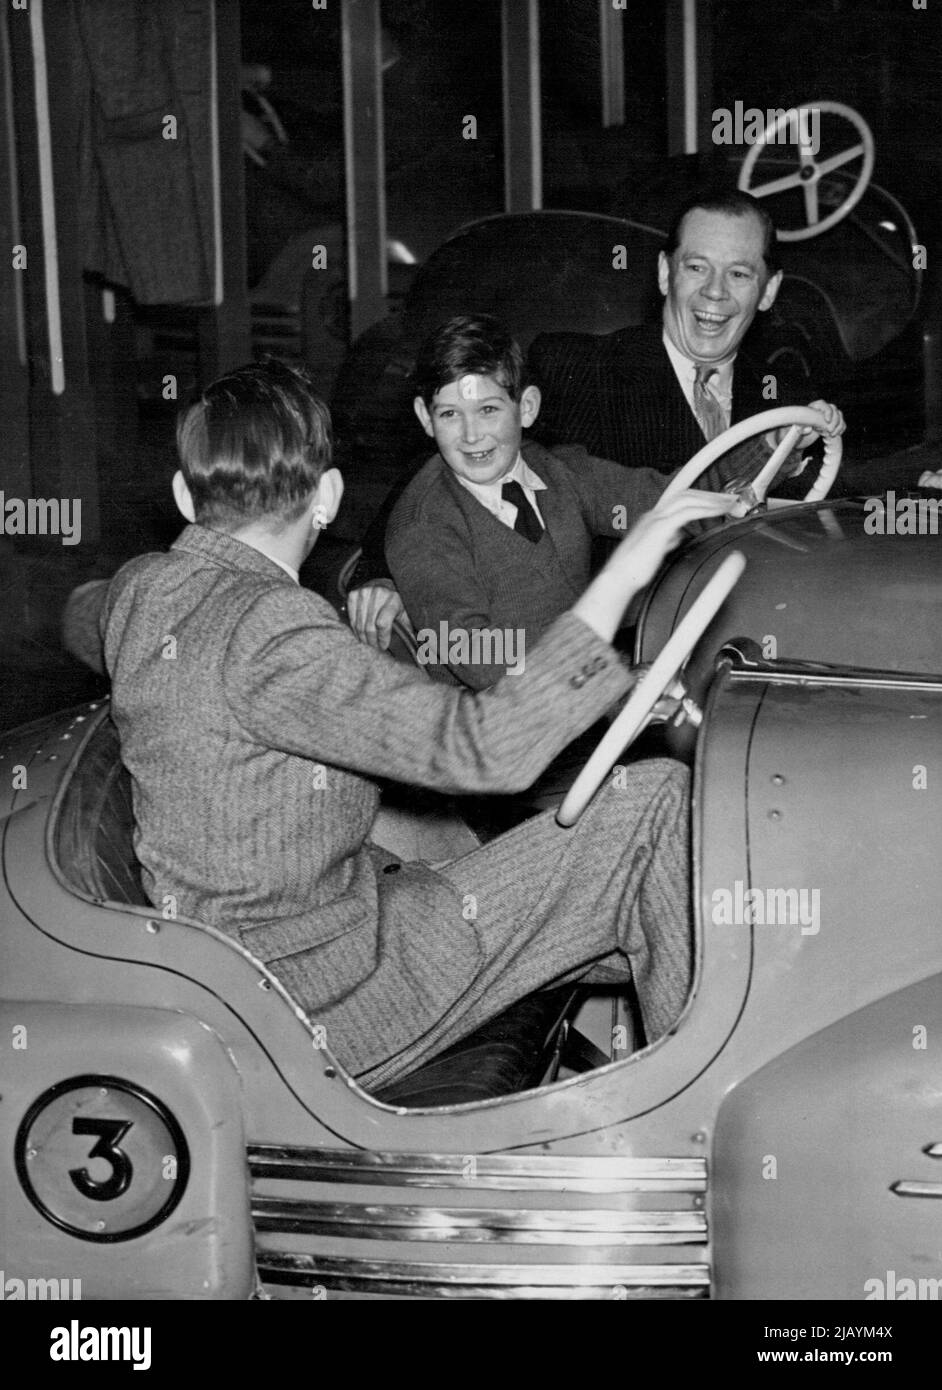 Royal Children Visit Circus And Fun Fair -- 'Dodgem with the Duke' A back view of the Duke of Kent as he bumps his brother Prince Michael who rides with Mr. Cyril Mills at the Fun Fair today. The Duchess of Kent's two children the young Duke of Kent and Prince Michael today visited Bertram Mills Circus at Olympia. Prince Michael of Kent rides the dodgins with his elder brother (back to camera) at the circus. January 10, 1951. (Photo by Fox Photos) Stock Photo